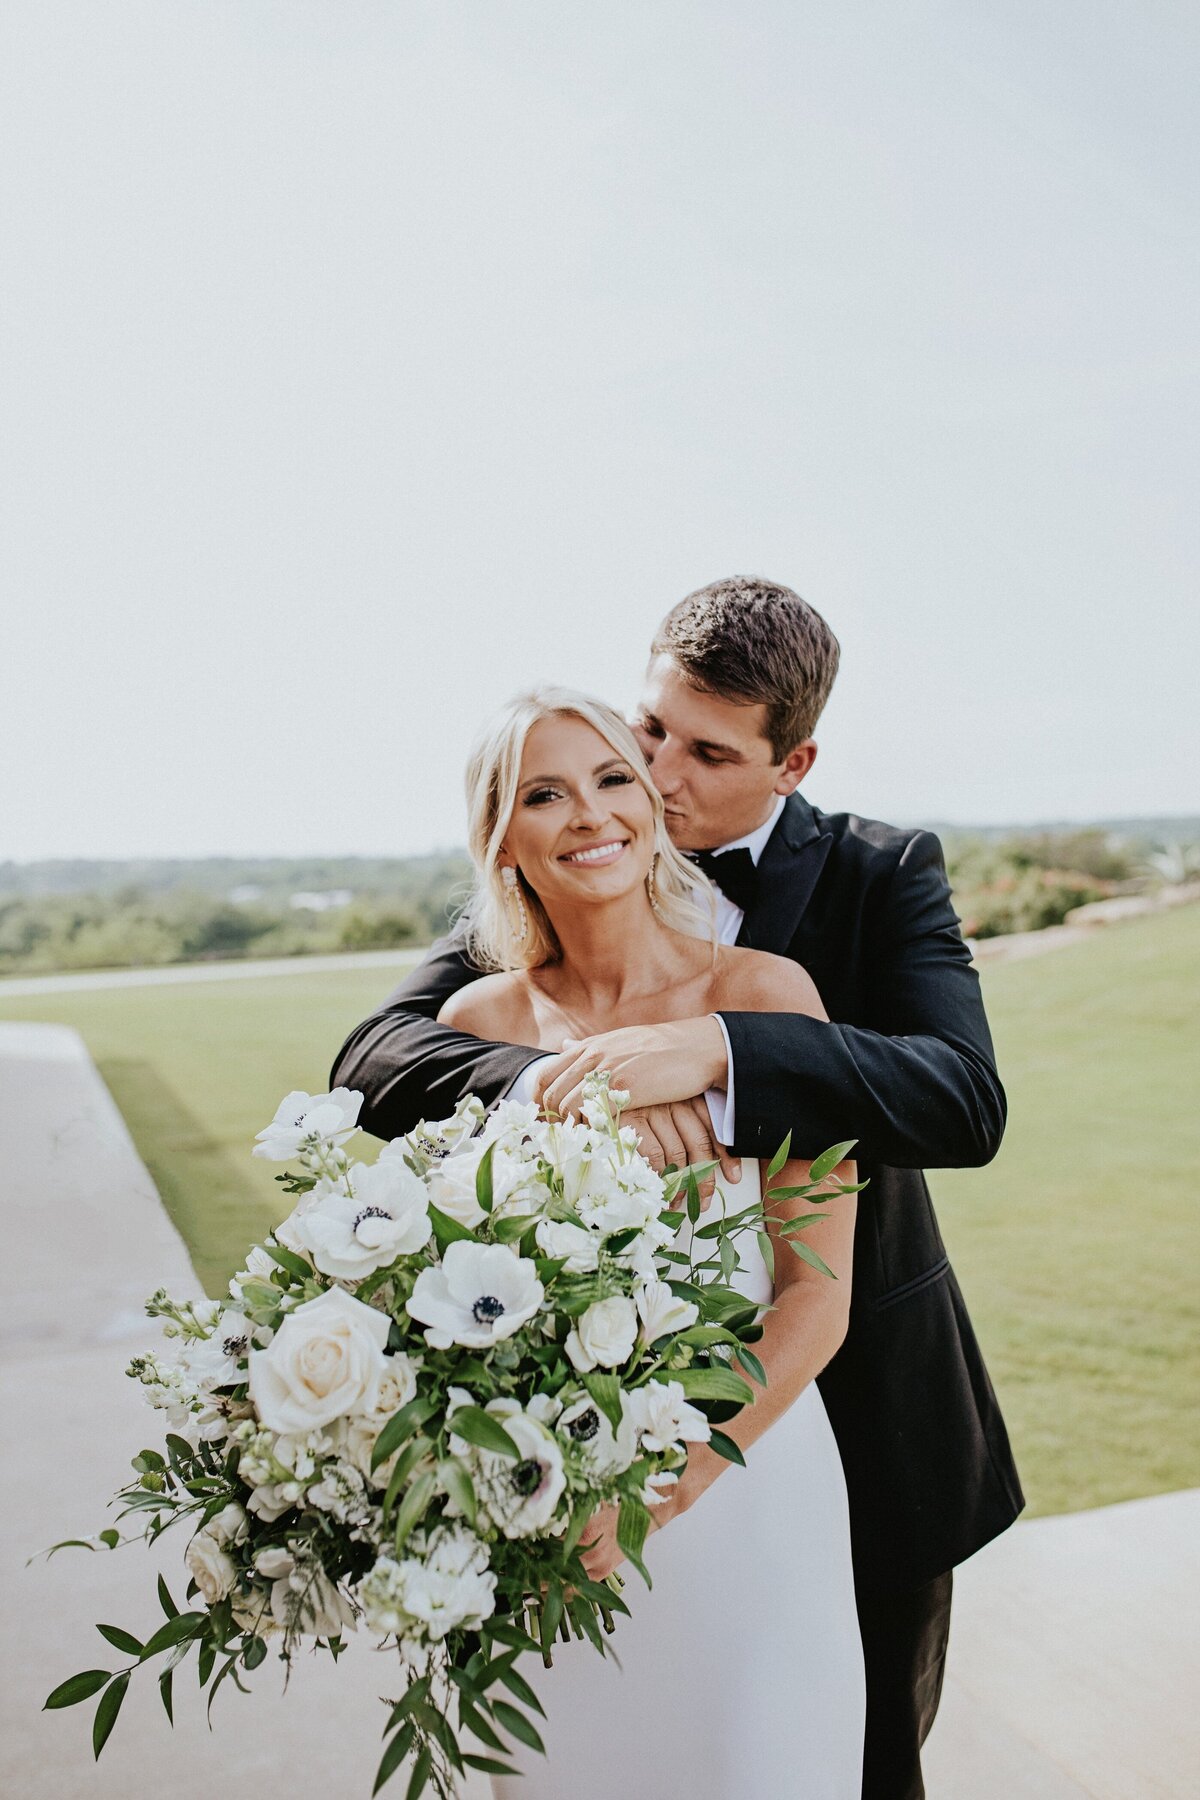 Kendra's Events, Wedding Planning and Floral Design, Fort Worth-Dallas Texas